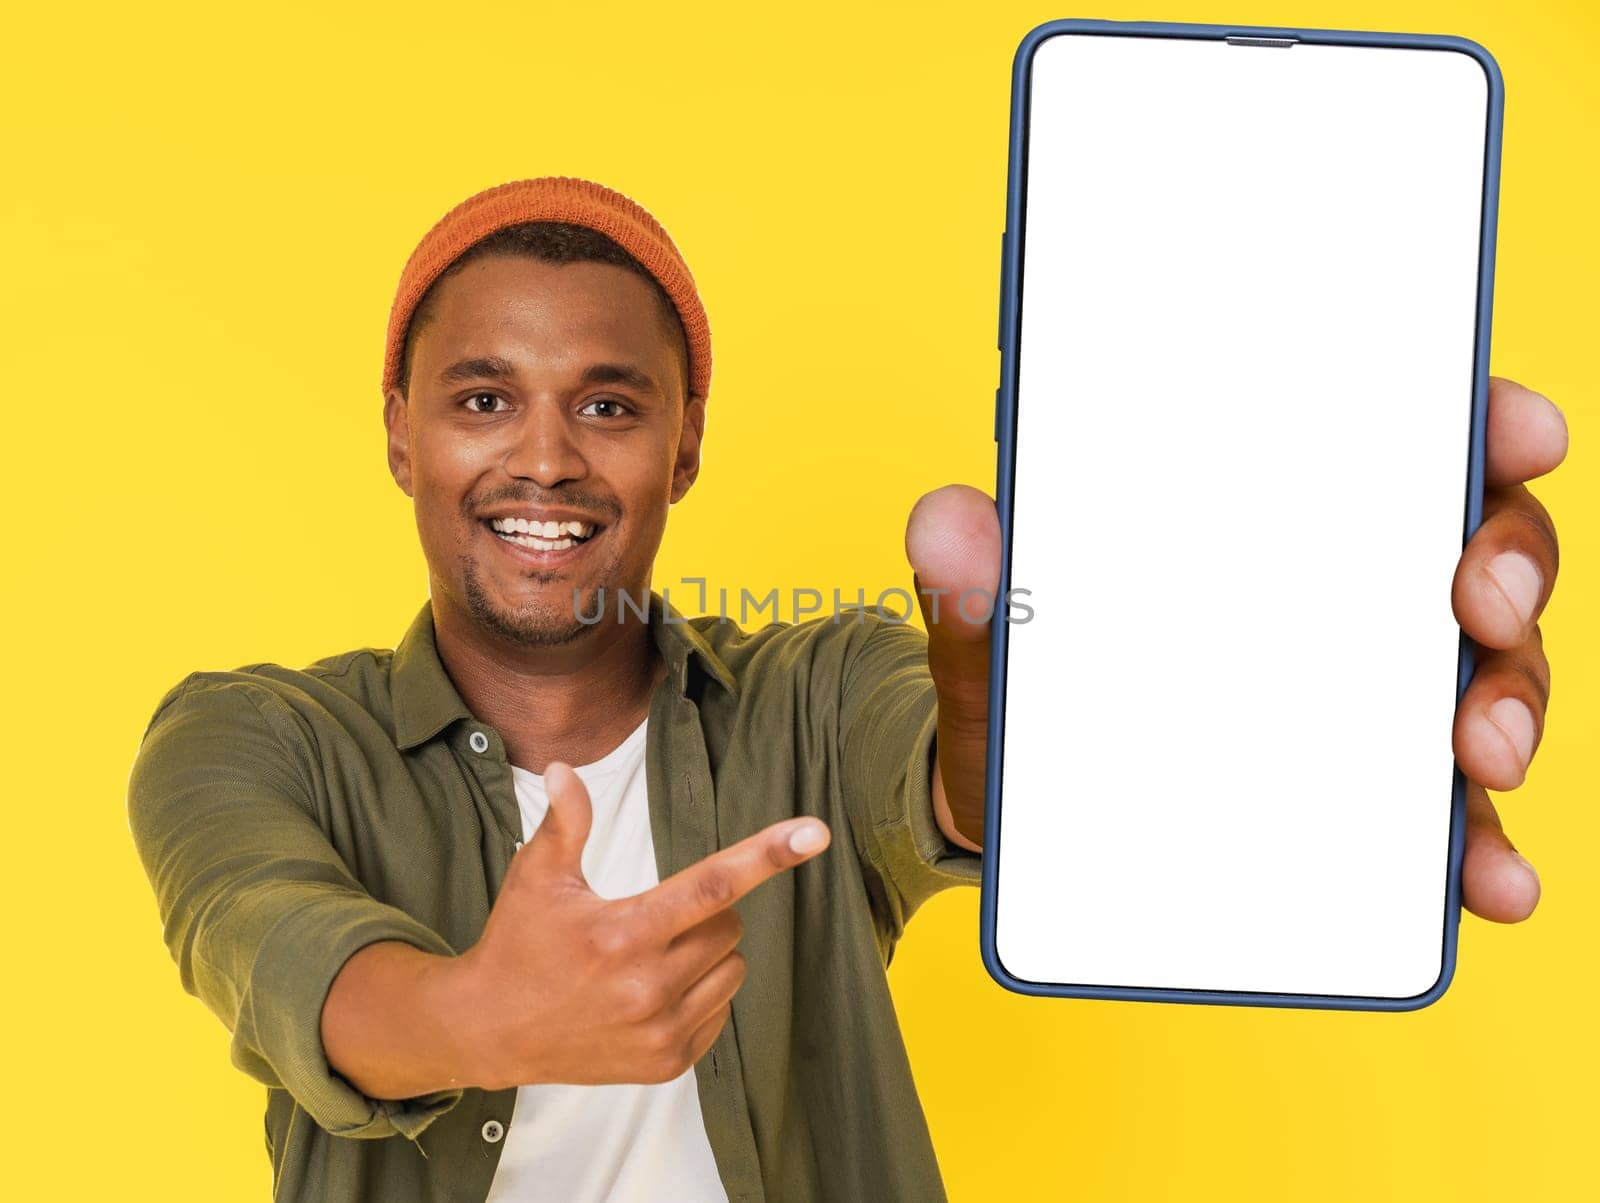 Smiling African student poses with large mobile phone featuring white blank screen, on yellow background with copy space. This image is perfect for product placement or advertising concepts. by LipikStockMedia